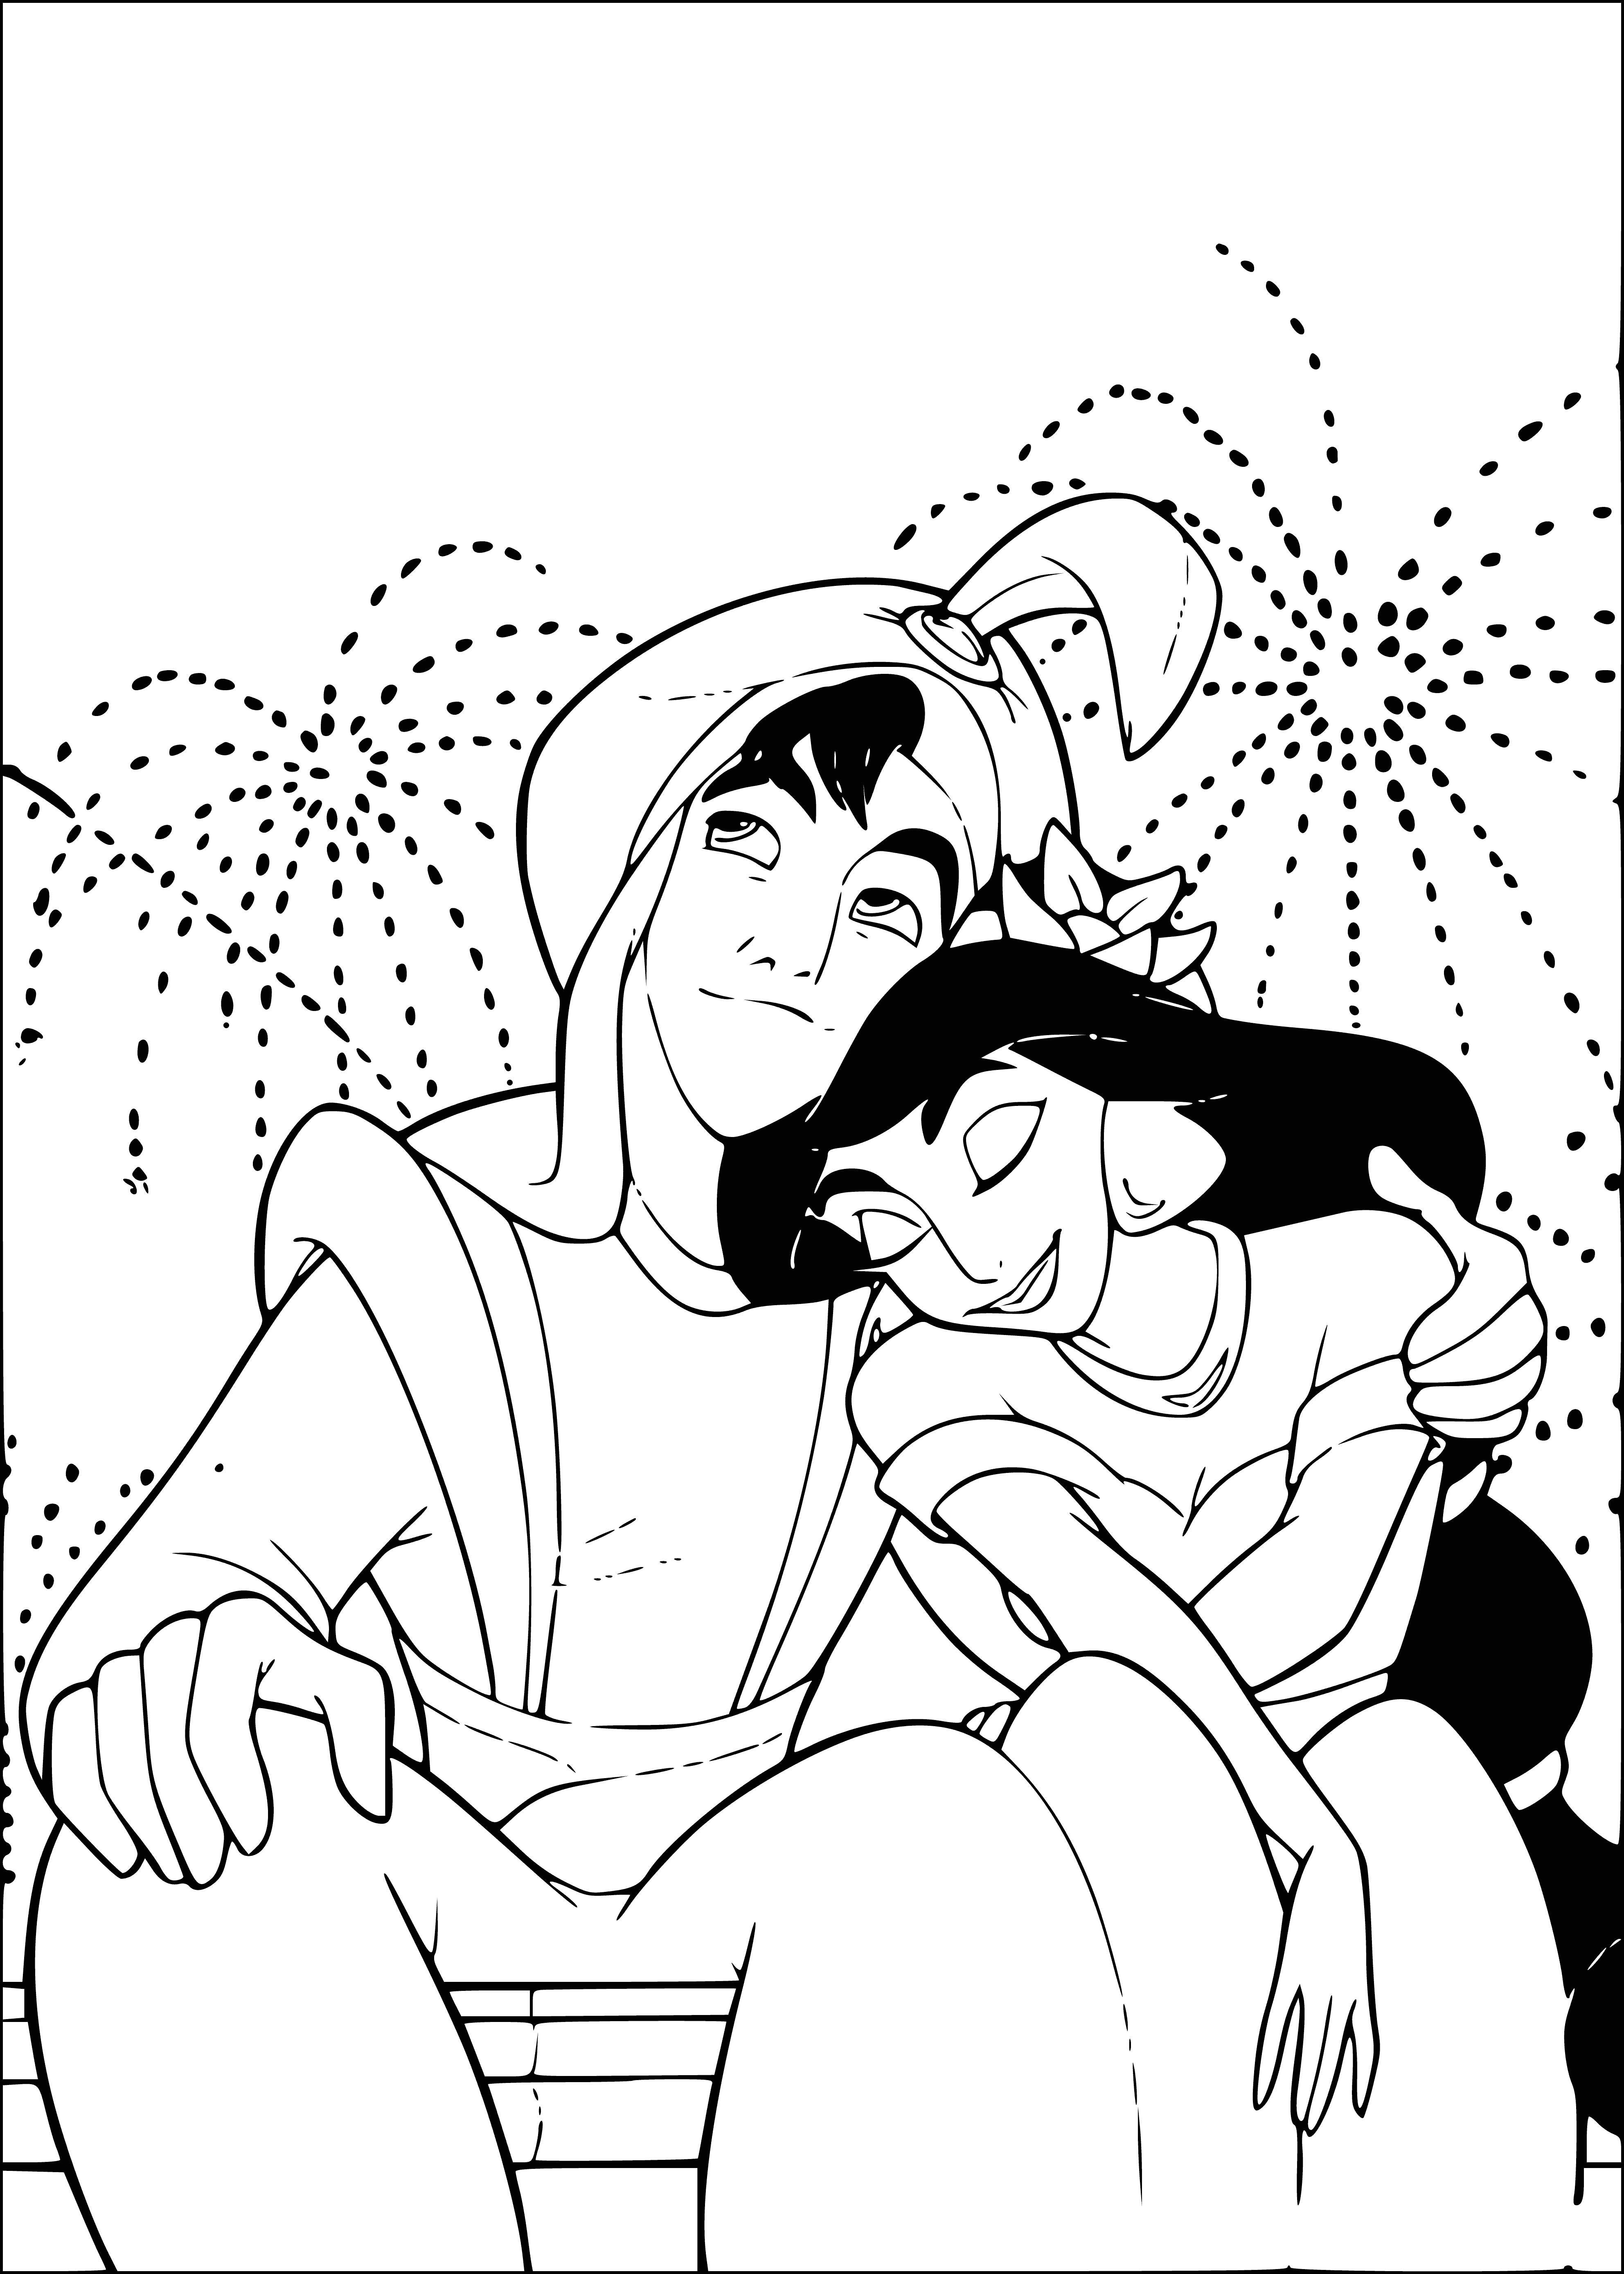 coloring page: Aladdin & Jasmine embrace, eyes closed, her hand near her face while he holds her waist. Behind them a large purple flower. #Aladdin